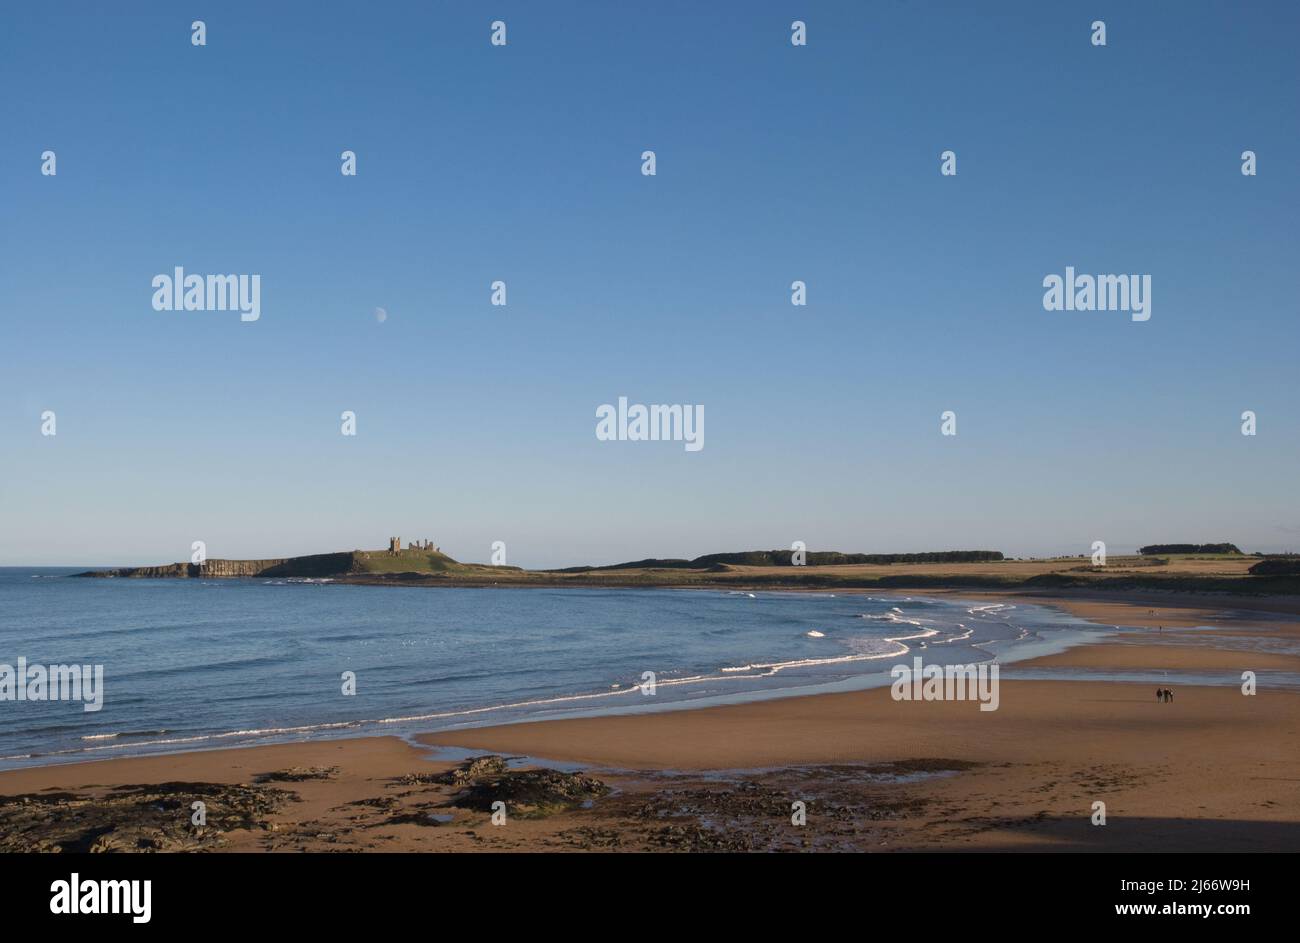 Landscape image of the wide sweeping beach at Embleton leading to a distant Dunstanburgh Castle with moon above in a blue sky and few people Stock Photo